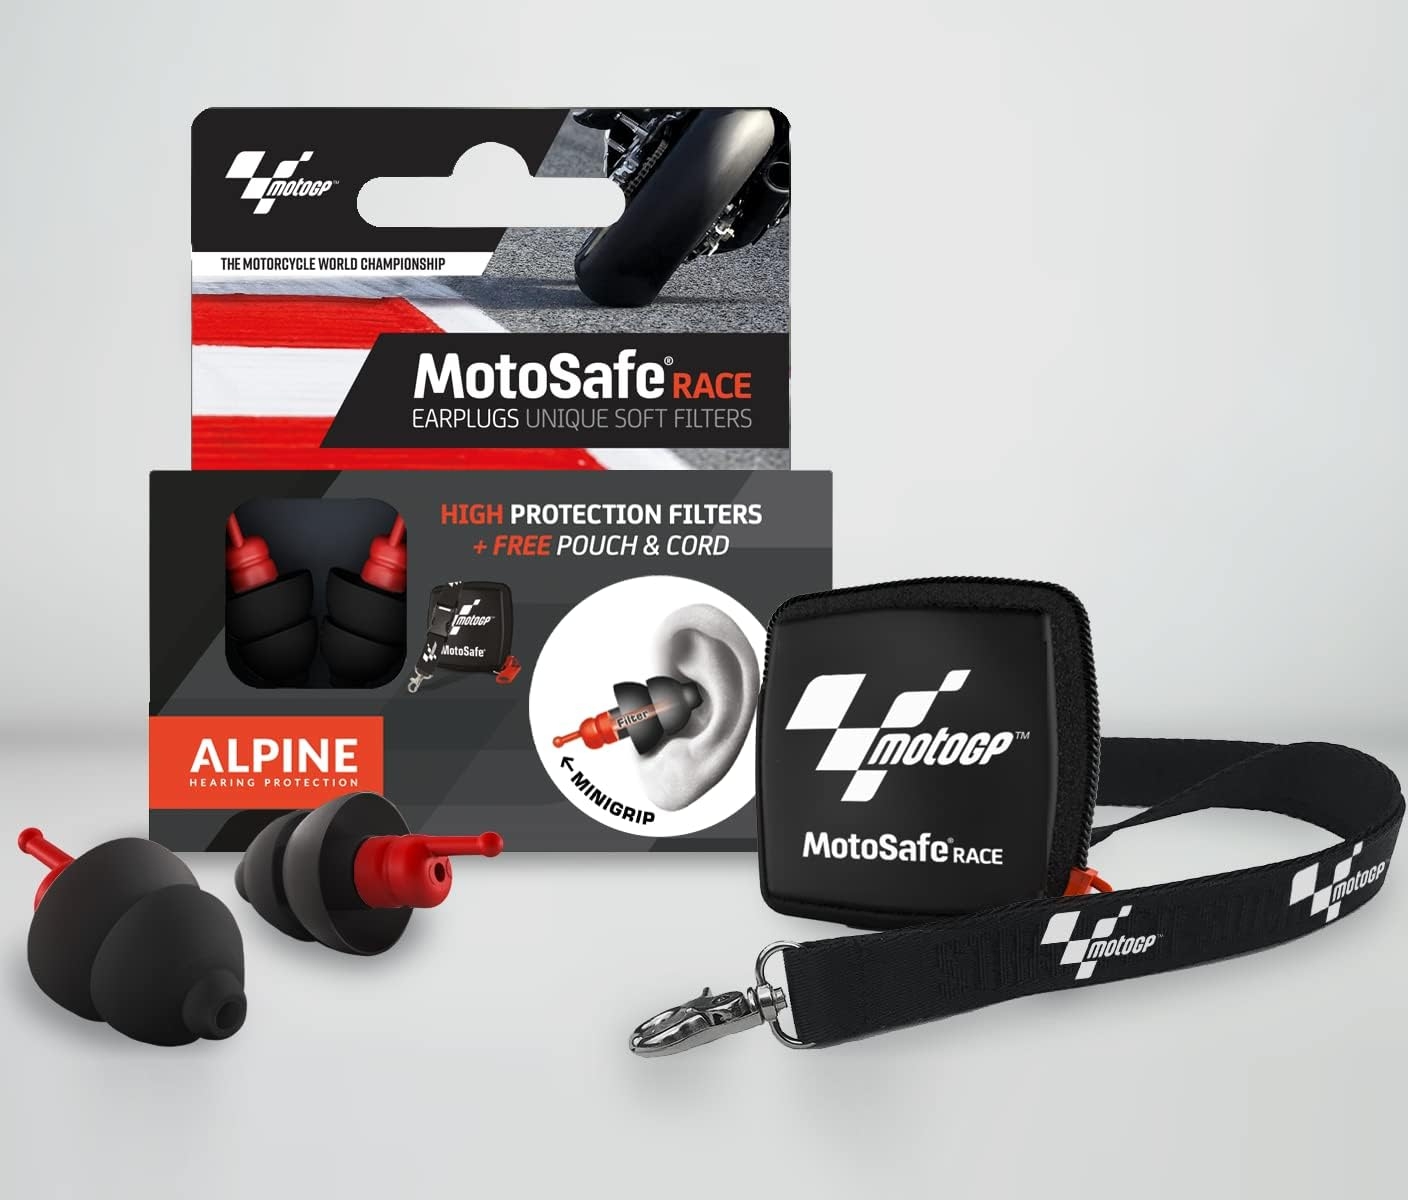 Alpine MotoSafe Race [Official MotoGP Edition] - Motorcycle Reusable Earplugs for Wind Noise Reduction - Ultra Soft Comfortable Filter Hearing Protection for Motor Racing, Touring & Riding, 1 Pair